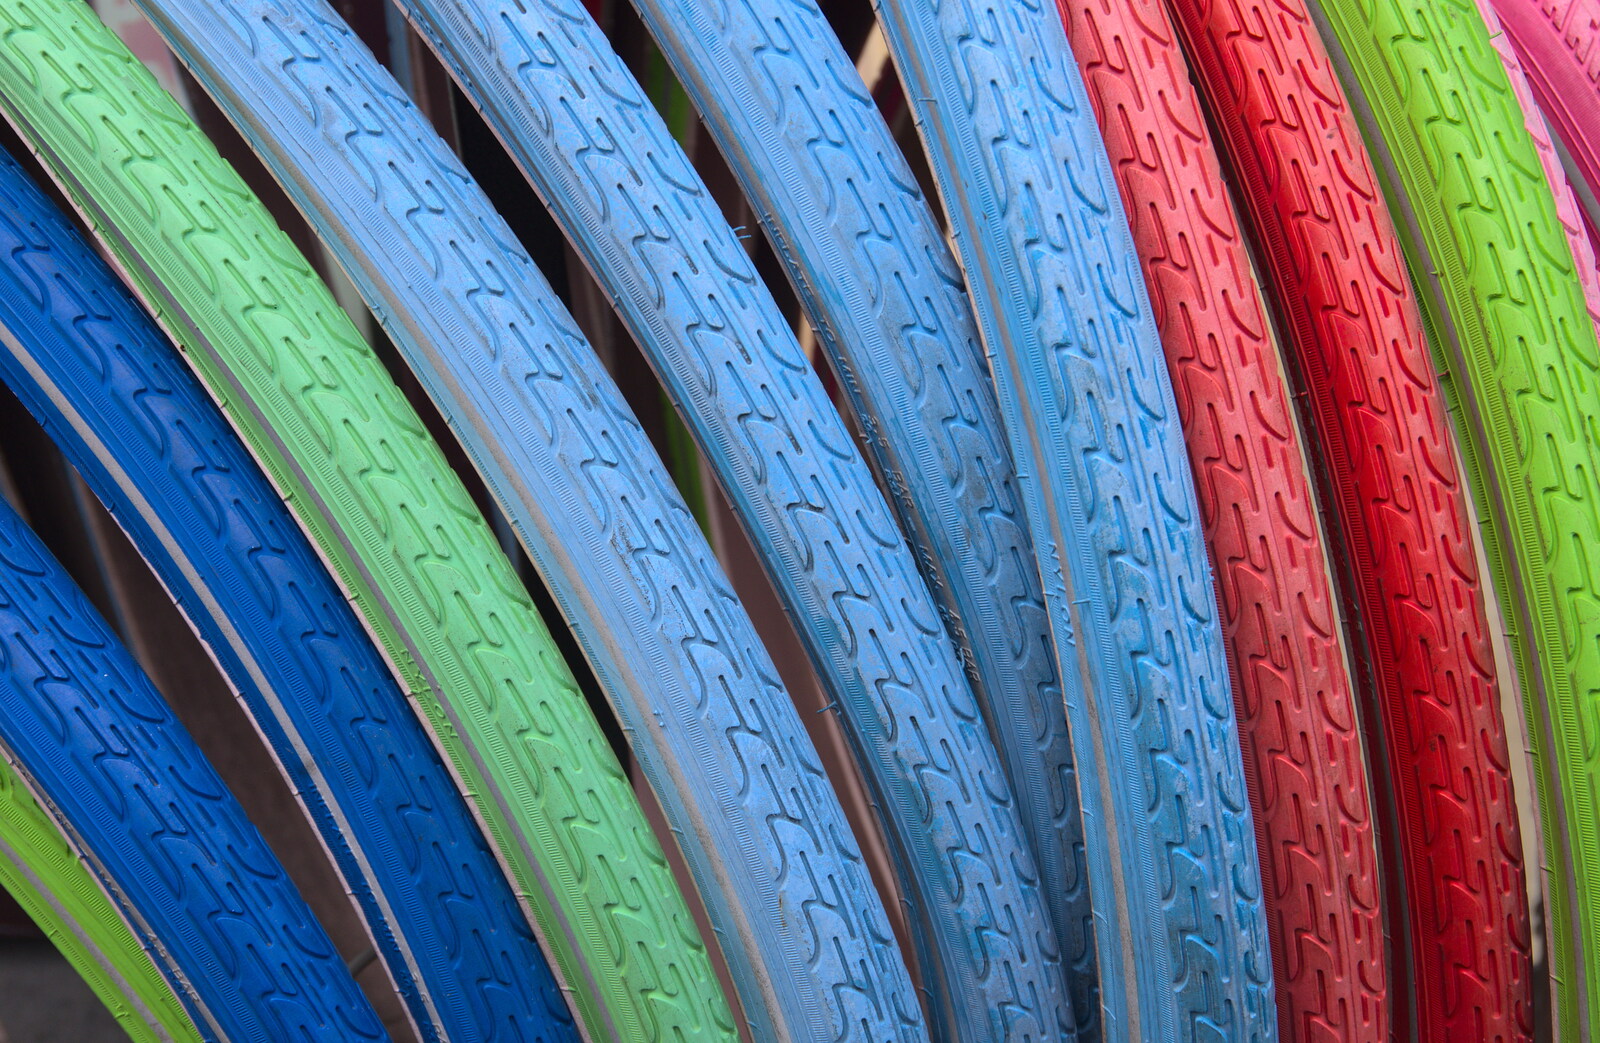 Brightly coloured bike tyres from A Postcard from Utrecht, Nederlands - 10th June 2018